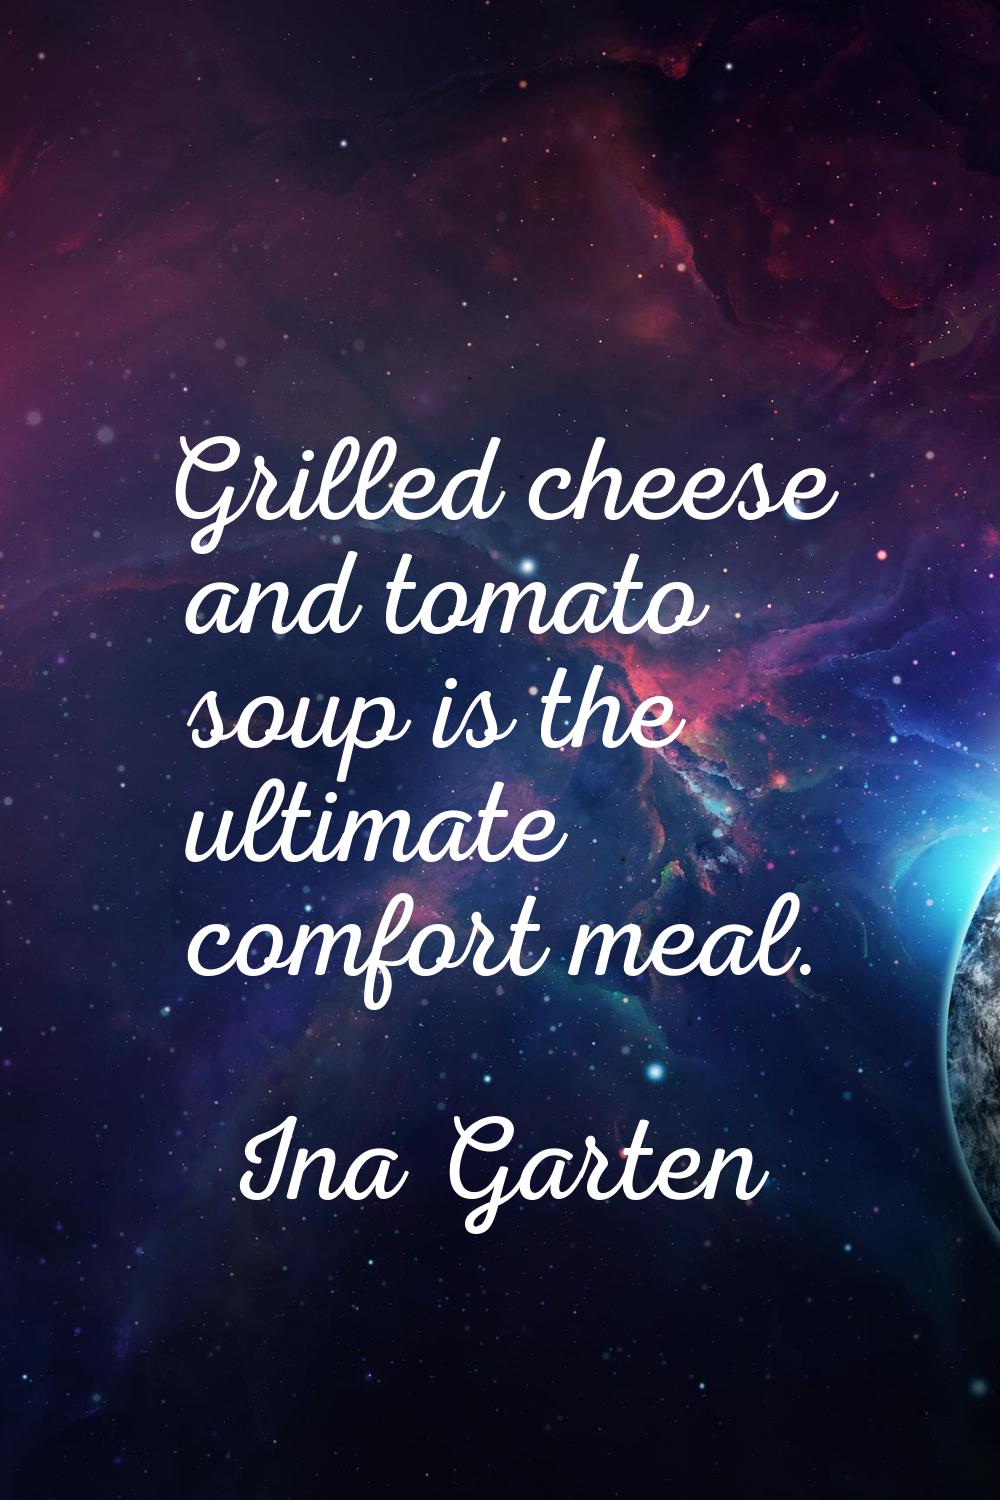 Grilled cheese and tomato soup is the ultimate comfort meal.